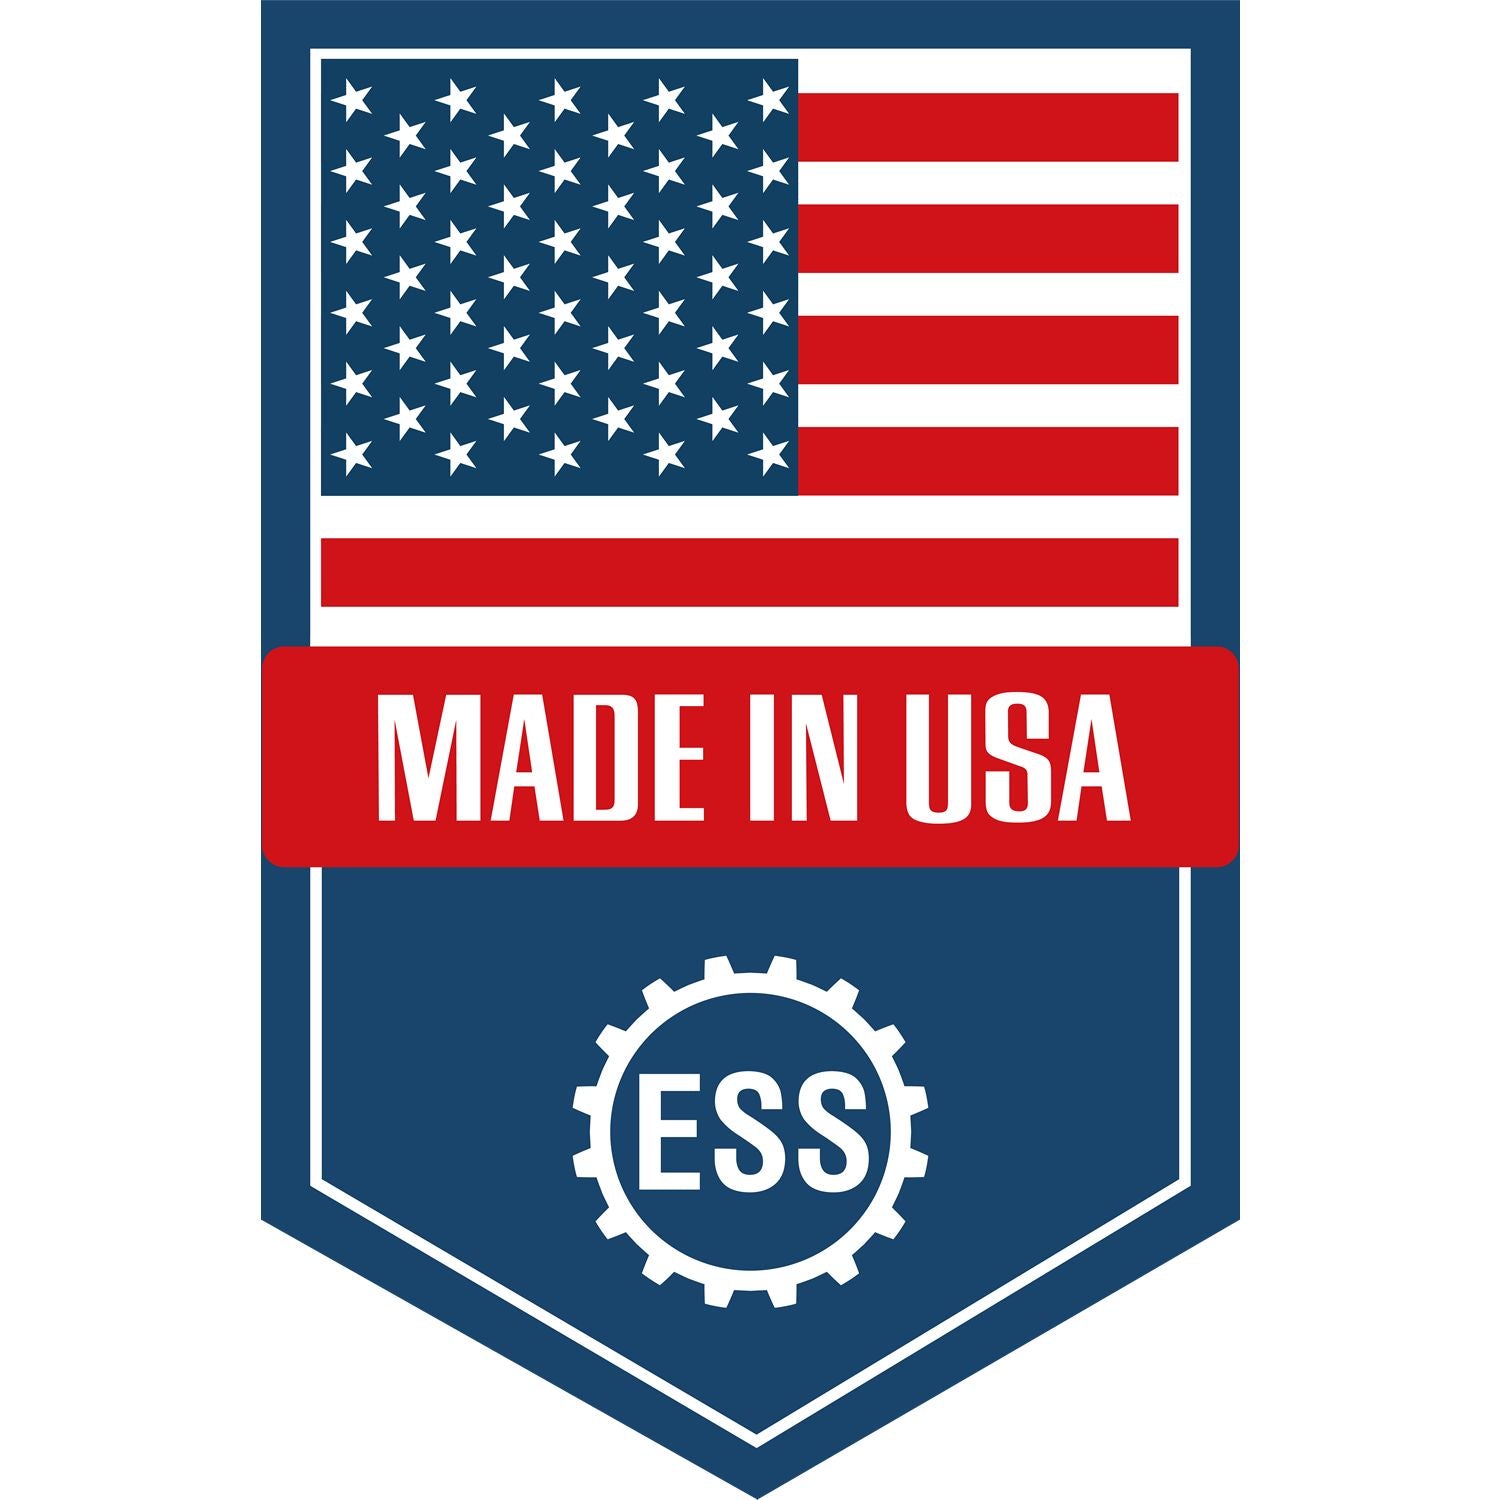 An icon or graphic with an american flag and text reading Made in USA for the State of Kentucky Handheld Landscape Architect Seal